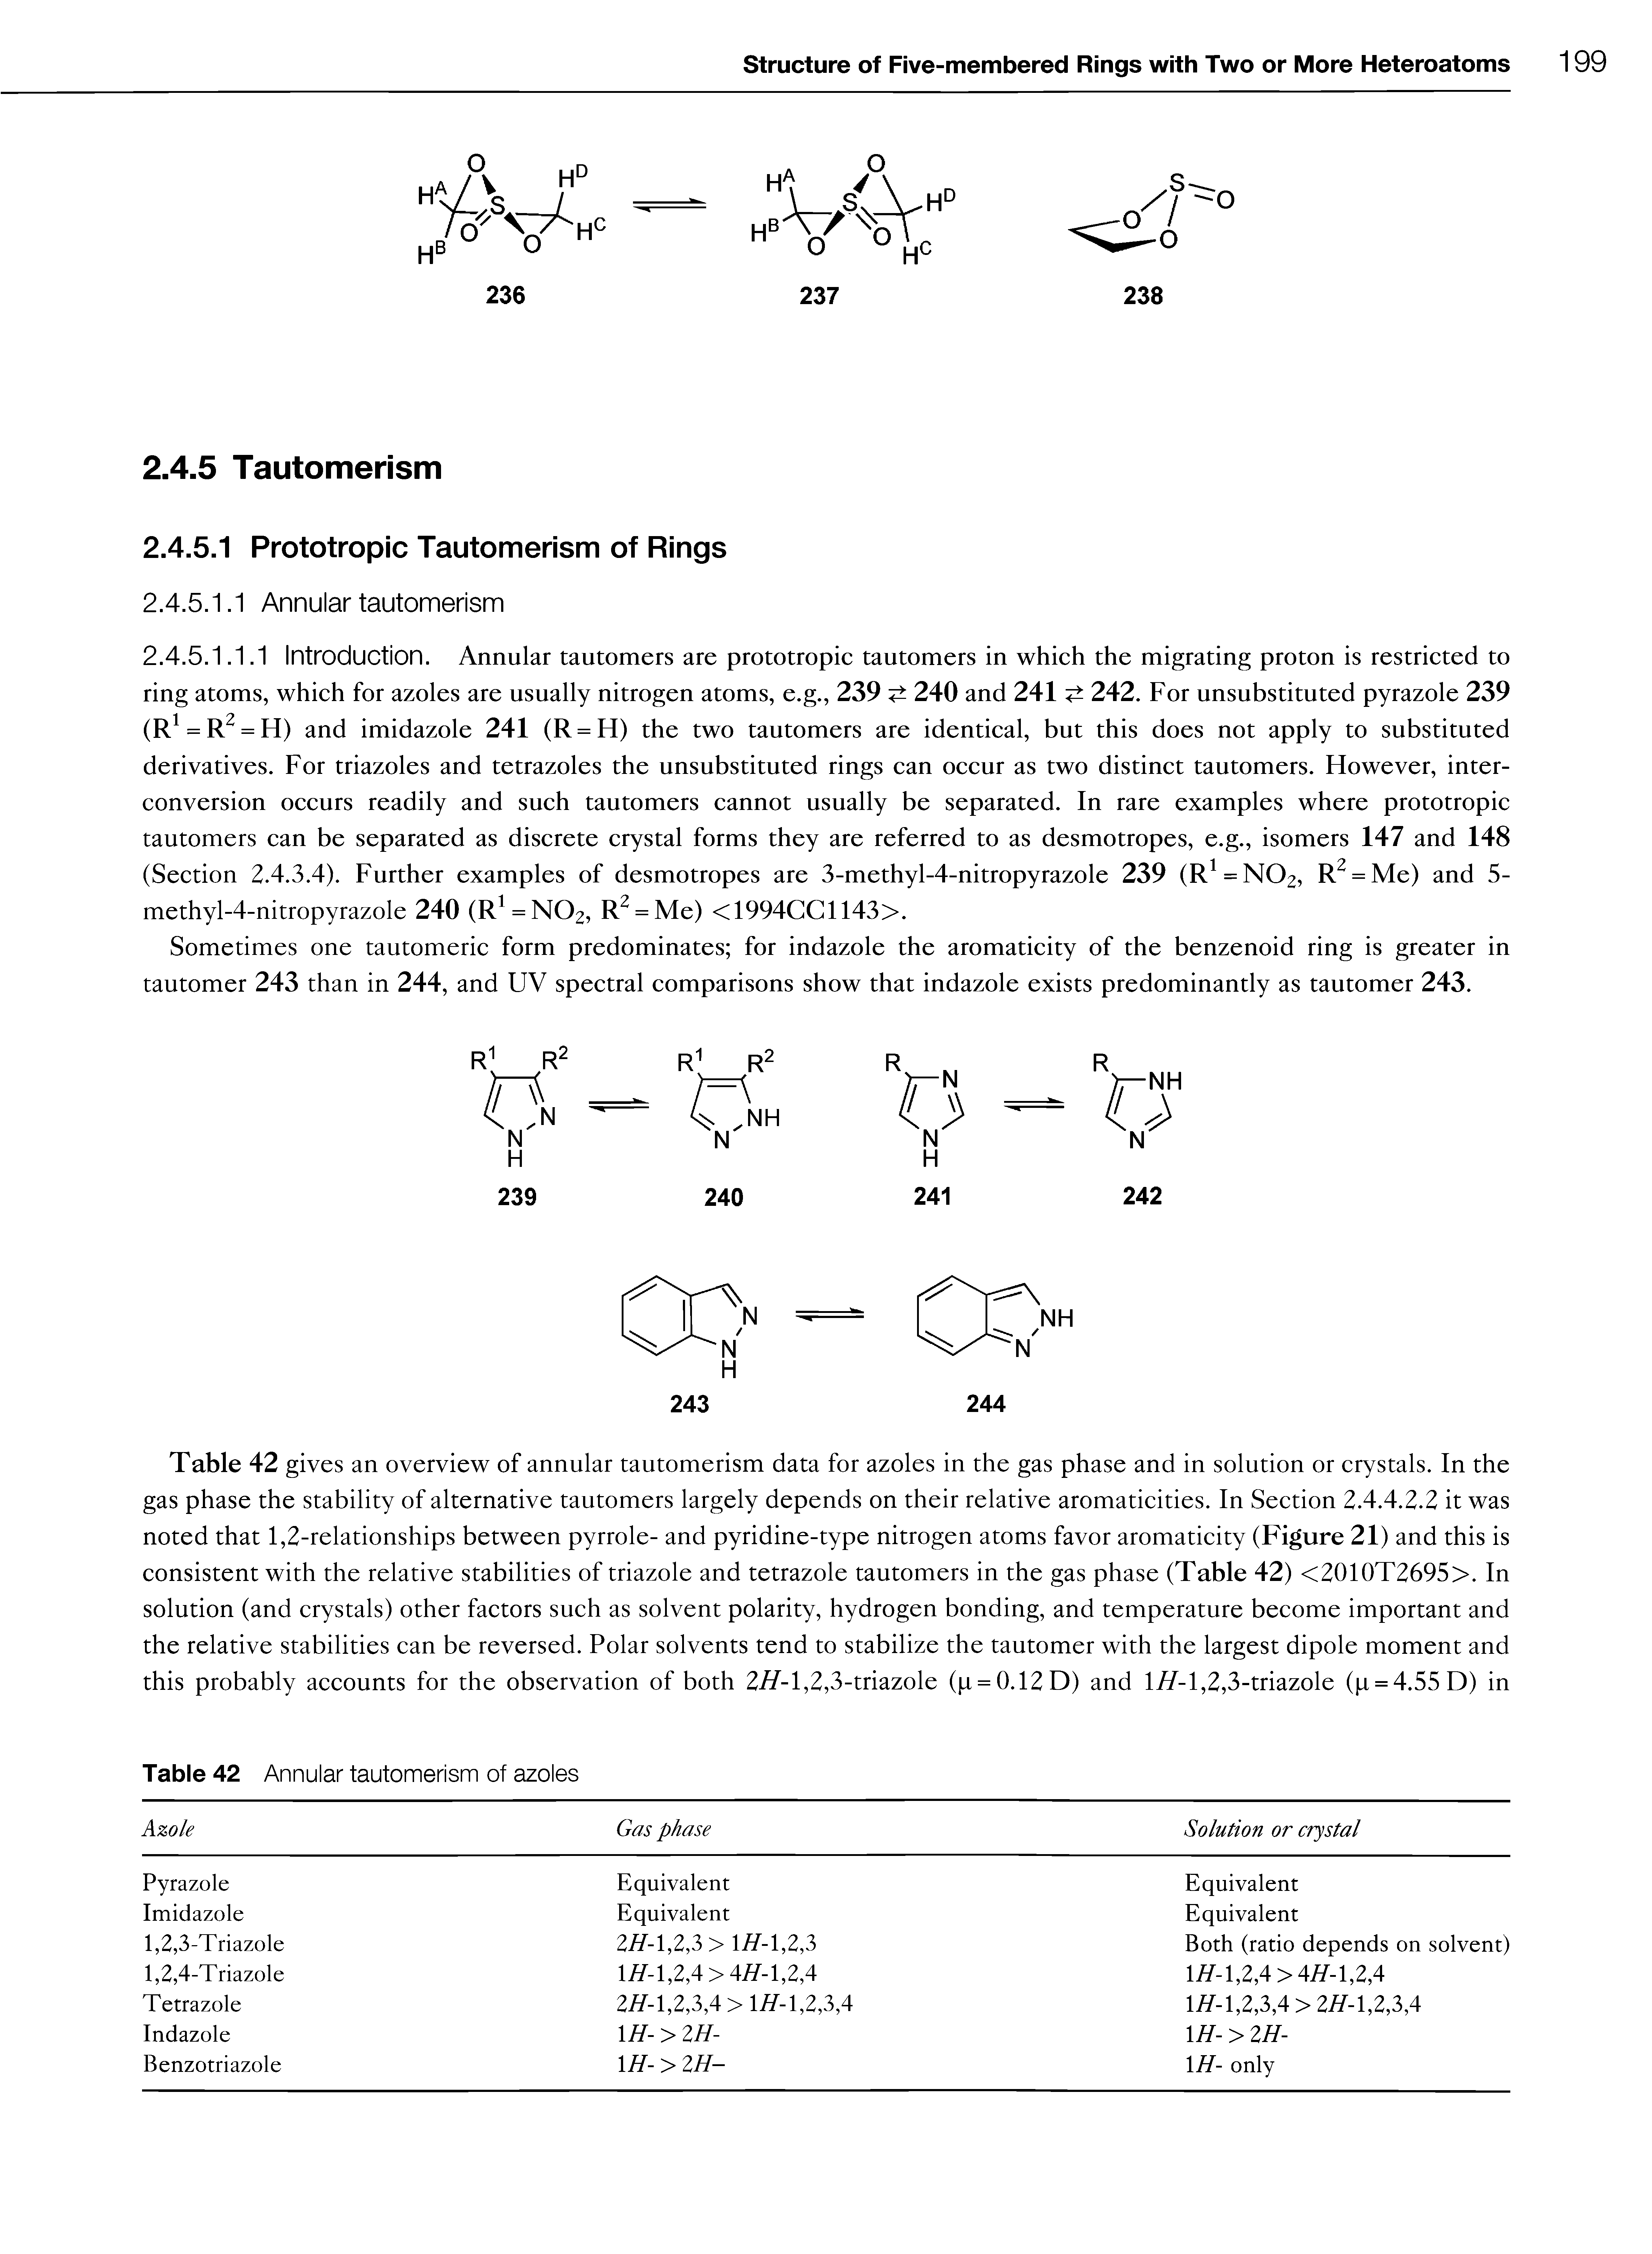 Table 42 gives an overview of annular tautomerism data for azoles in the gas phase and in solution or crystals. In the gas phase the stability of alternative tautomers largely depends on their relative aromaticities. In Section 2 A.4.2.2 it was noted that 1,2-relationships between pyrrole- and pyridine-type nitrogen atoms favor aromaticity (Figure 21) and this is consistent with the relative stabilities of triazole and tetrazole tautomers in the gas phase (Table 42) <2010T2695>. In solution (and crystals) other factors such as solvent polarity, hydrogen bonding, and temperature become important and the relative stabilities can be reversed. Polar solvents tend to stabilize the tautomer with the largest dipole moment and this probably accounts for the observation of both 2H-1,2,3-triazole (p = 0.12D) and H-1,2,3-triazole (p = 4.55D) in...